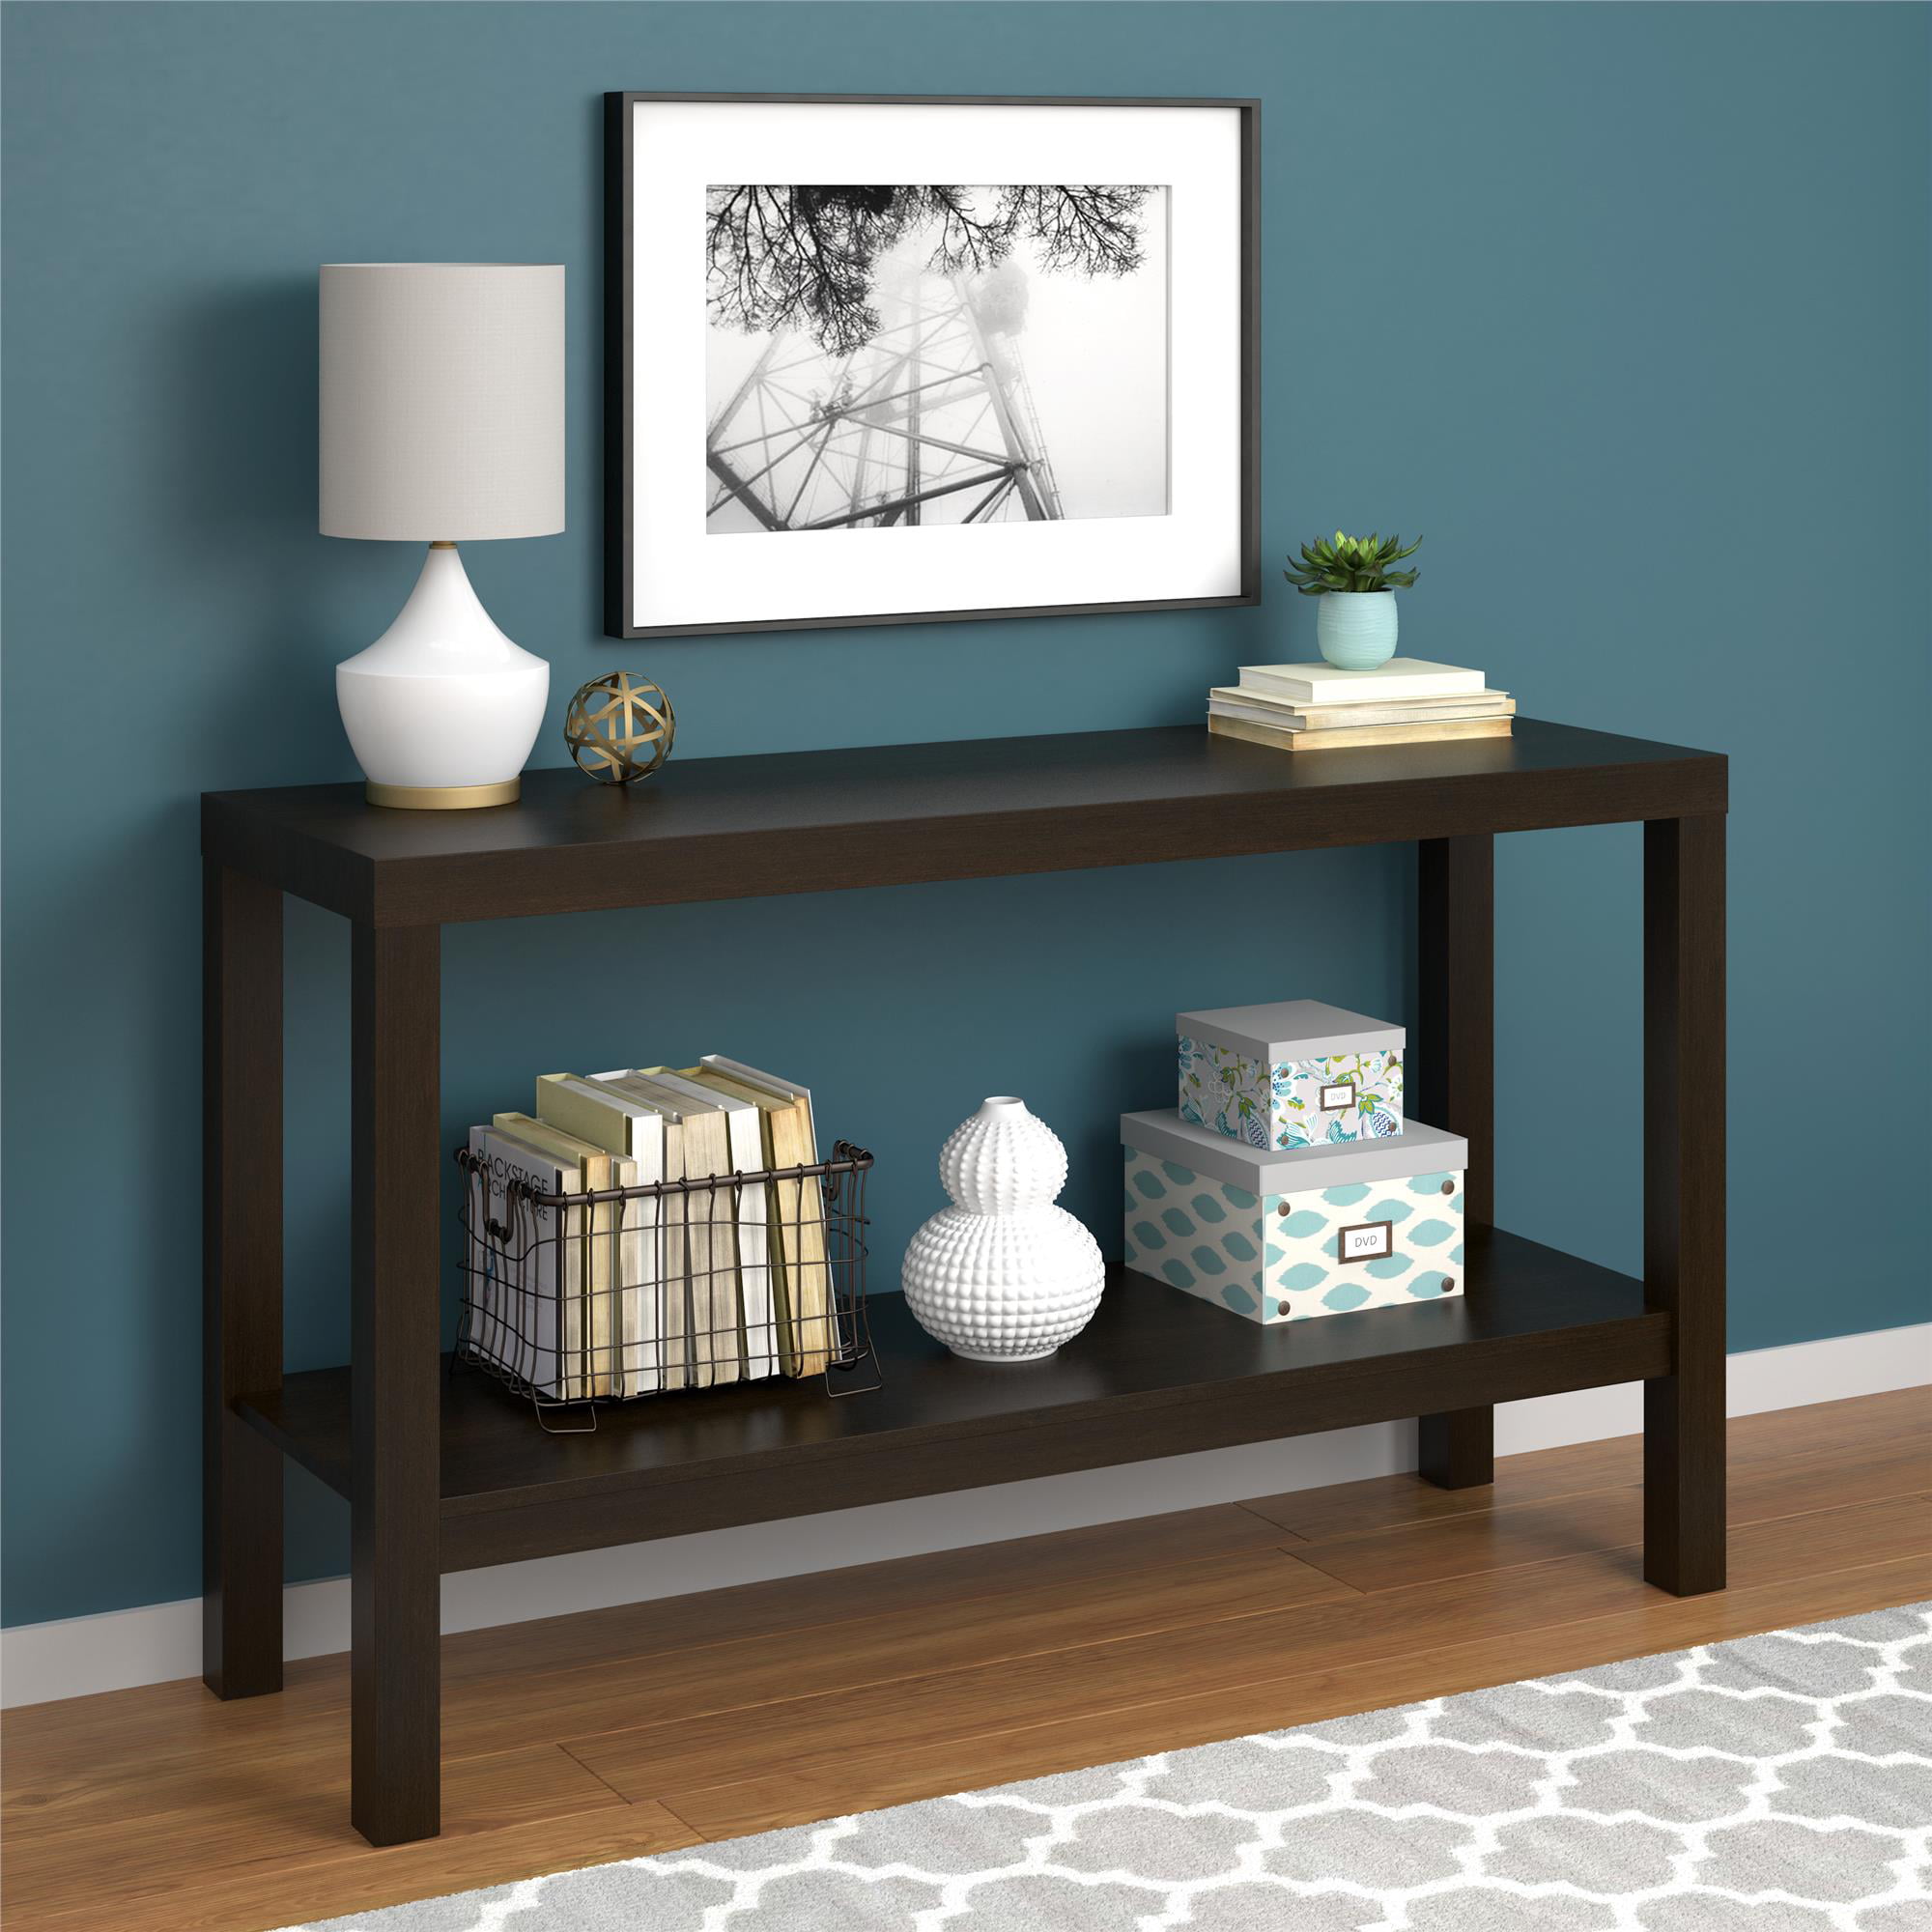 Mainstays Parsons Console Table, Multiple Colors Available - expresso